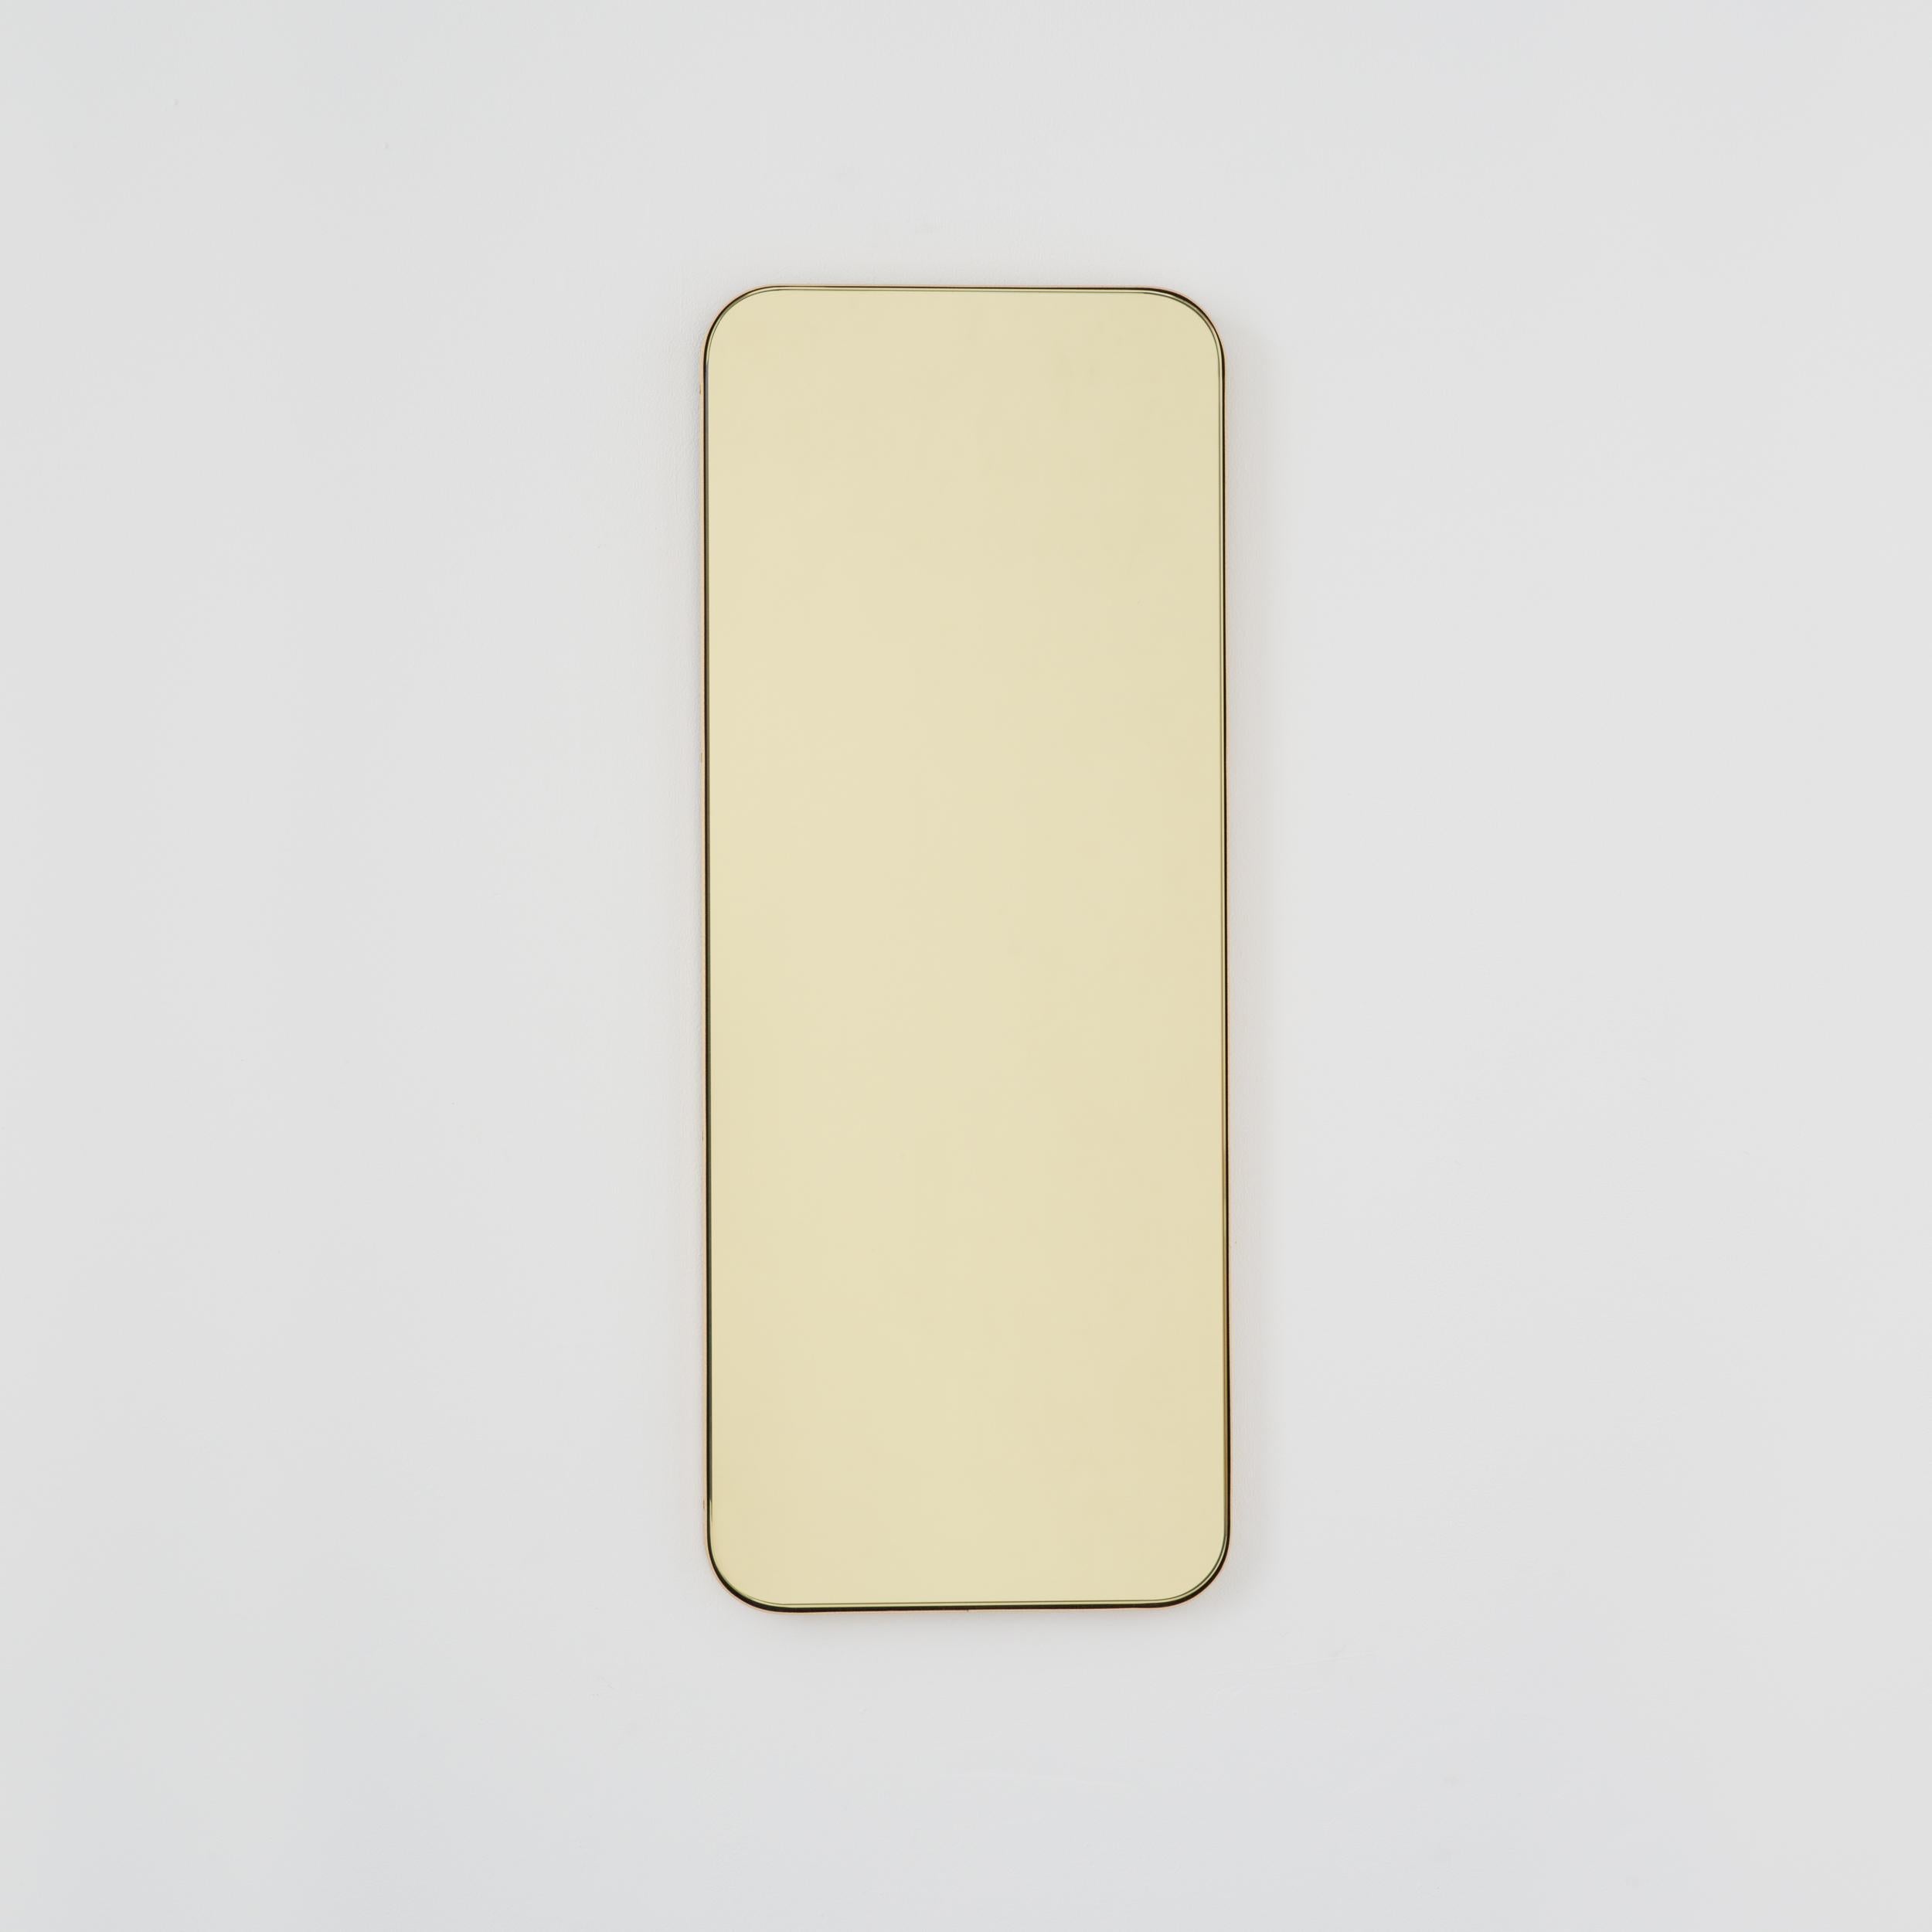 British In Stock Quadris Gold Tinted Rectangular Mirror, Brass Frame, Small For Sale